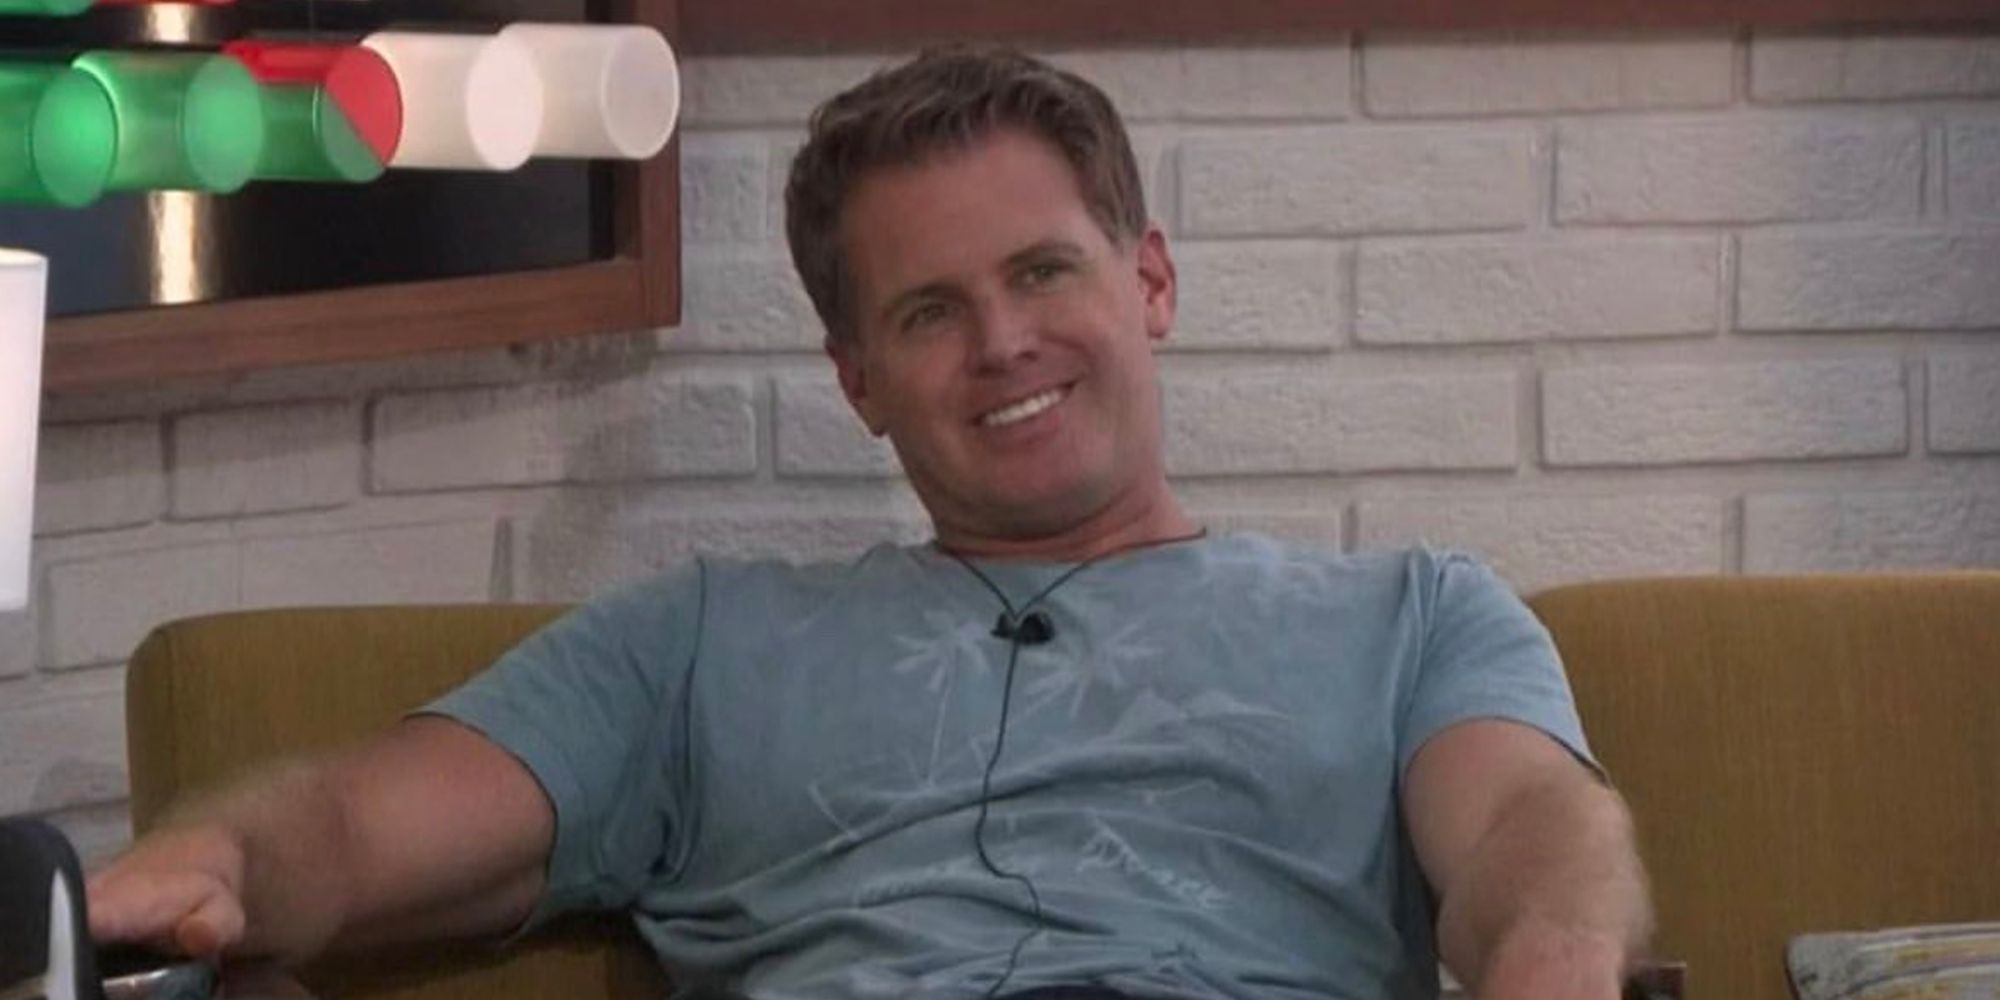 Memphis sitting in a chair in the Big Brother house, smiling widely.